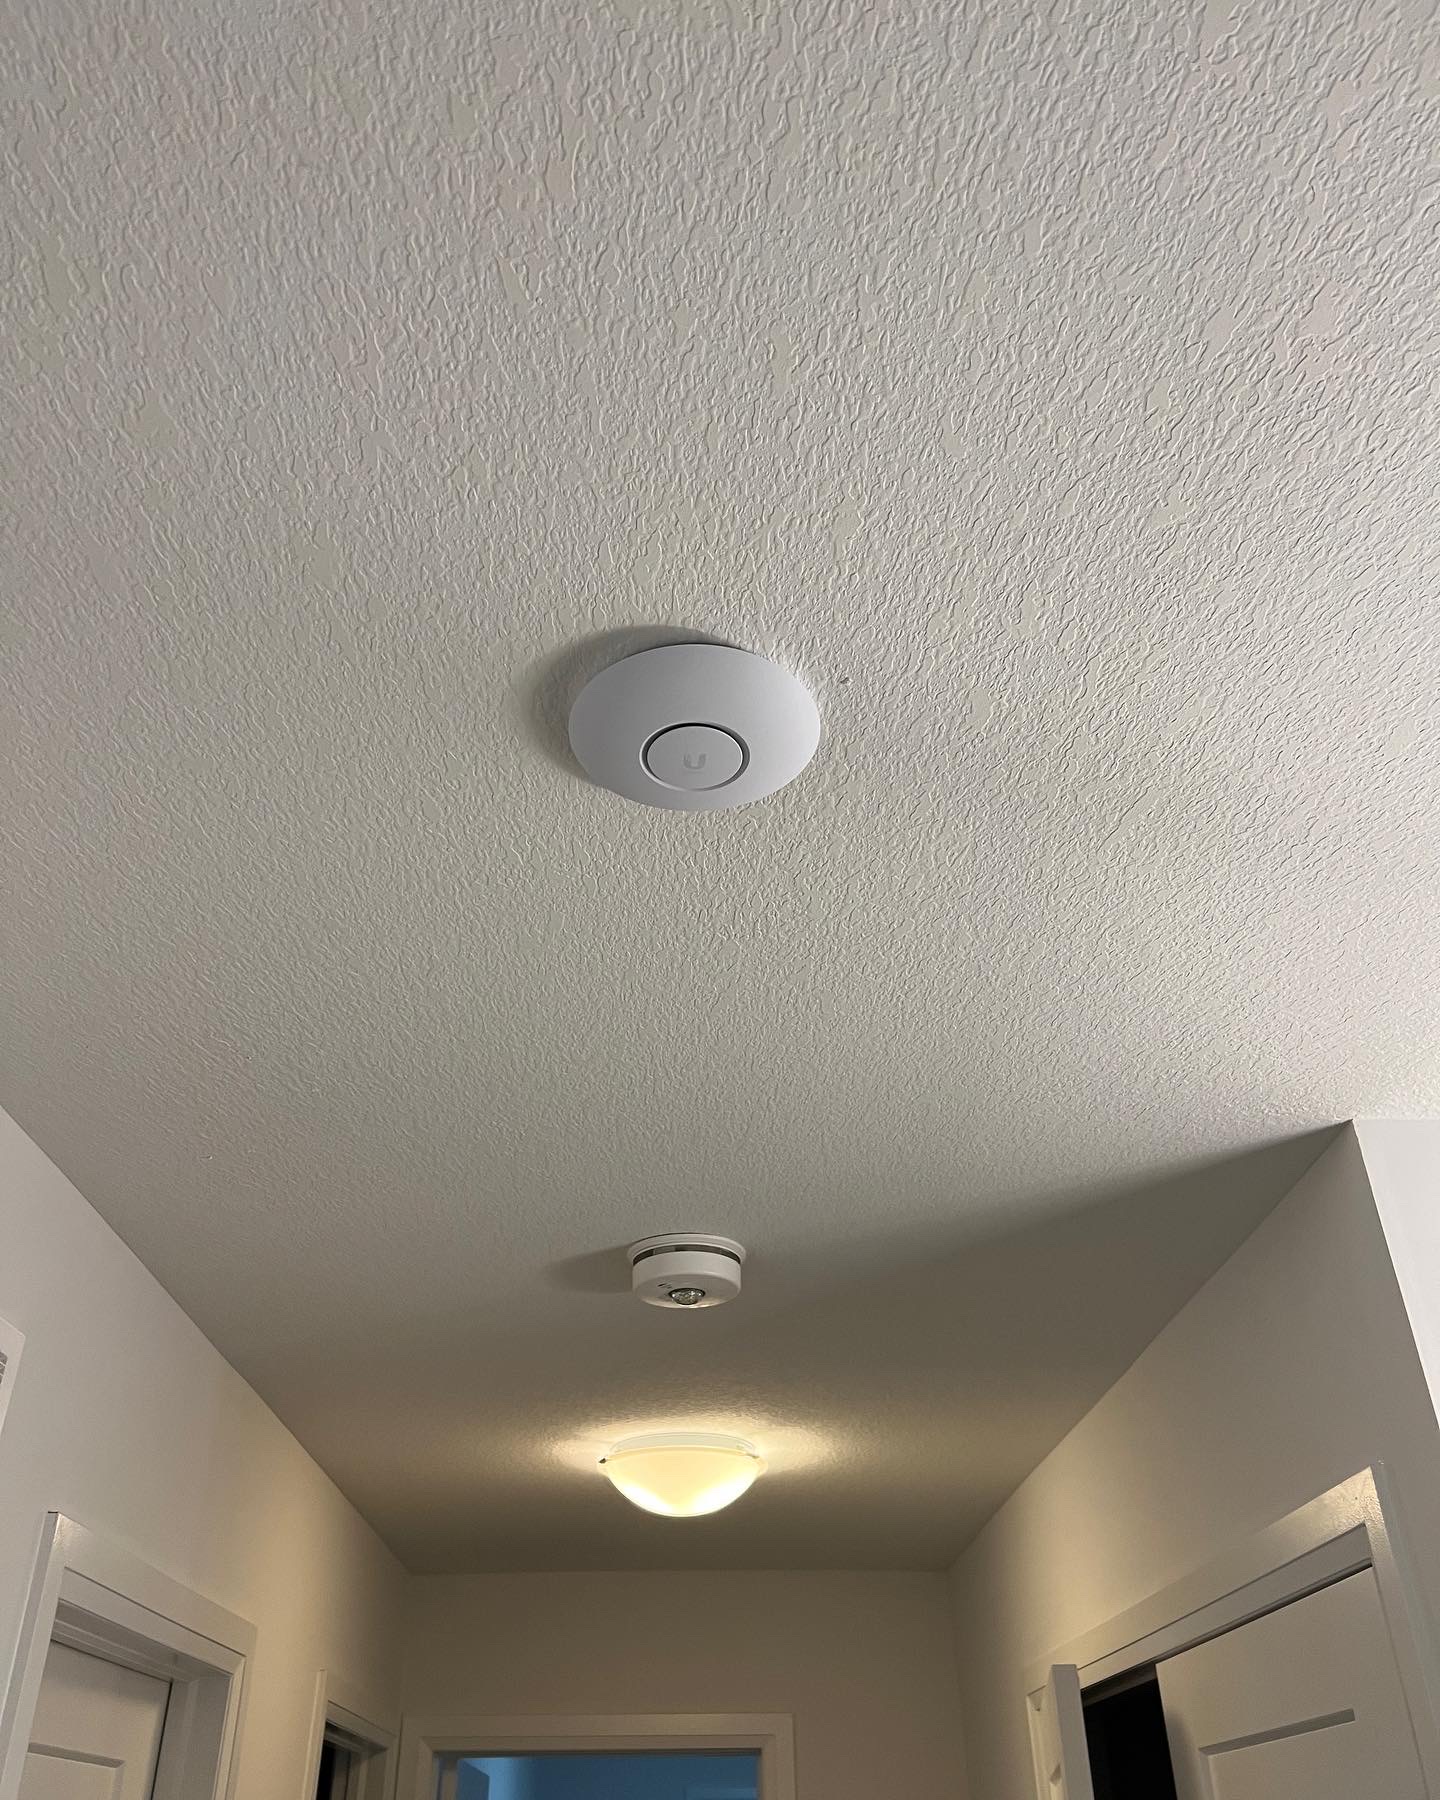 Ubiquiti AC LR Access Point Ceiling Mounted in Line with lights